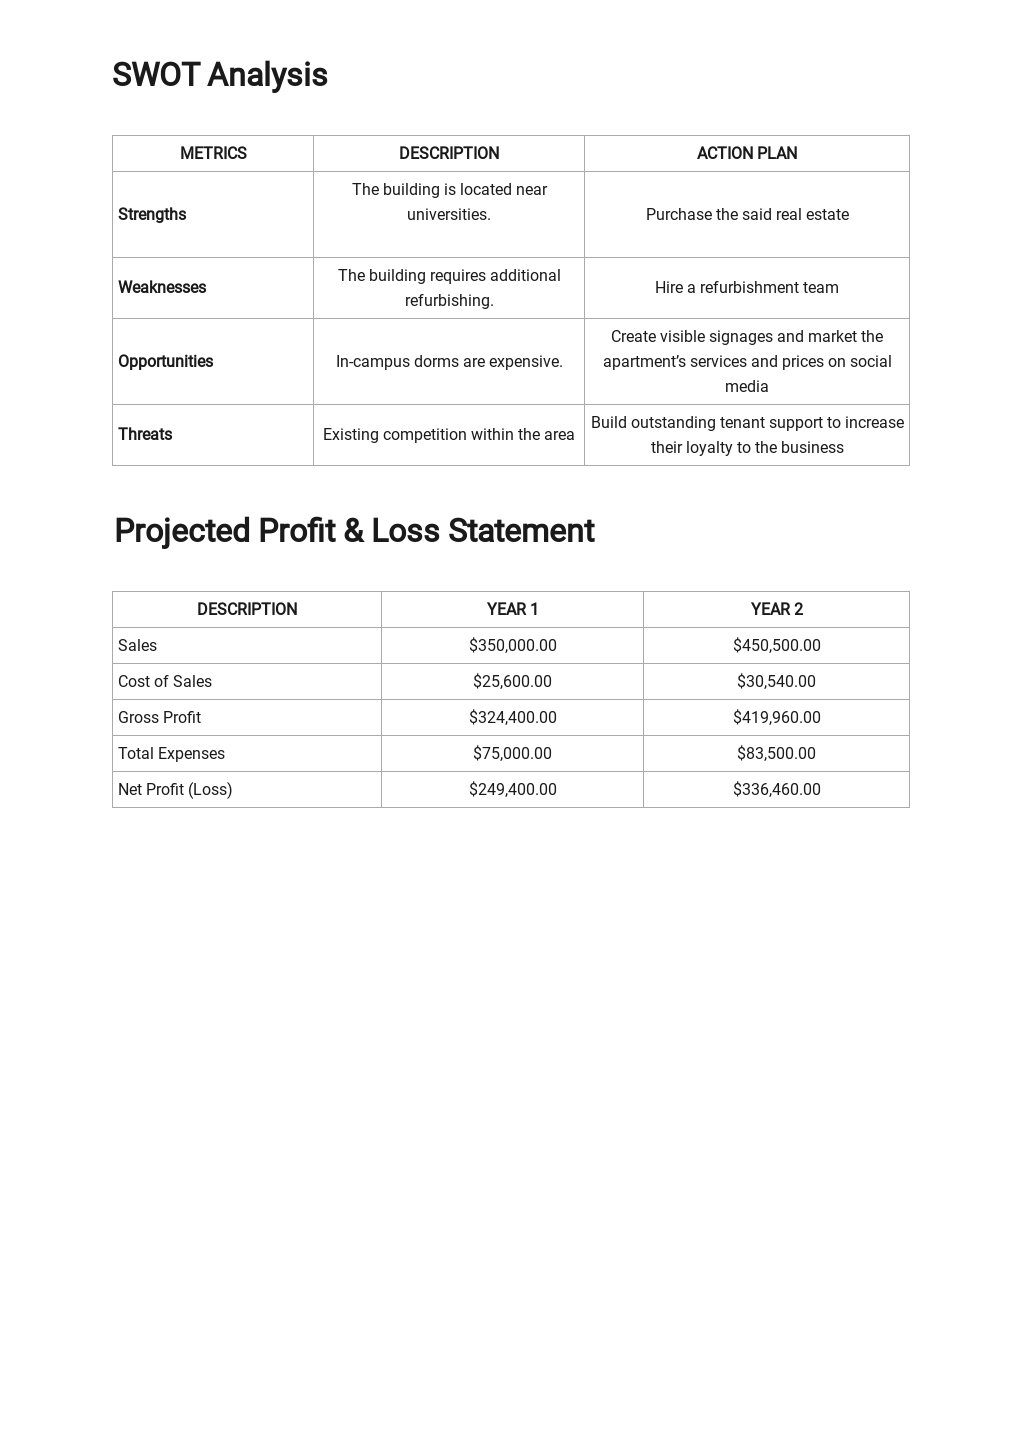 Real Estate Investment Analysis Template 2.jpe